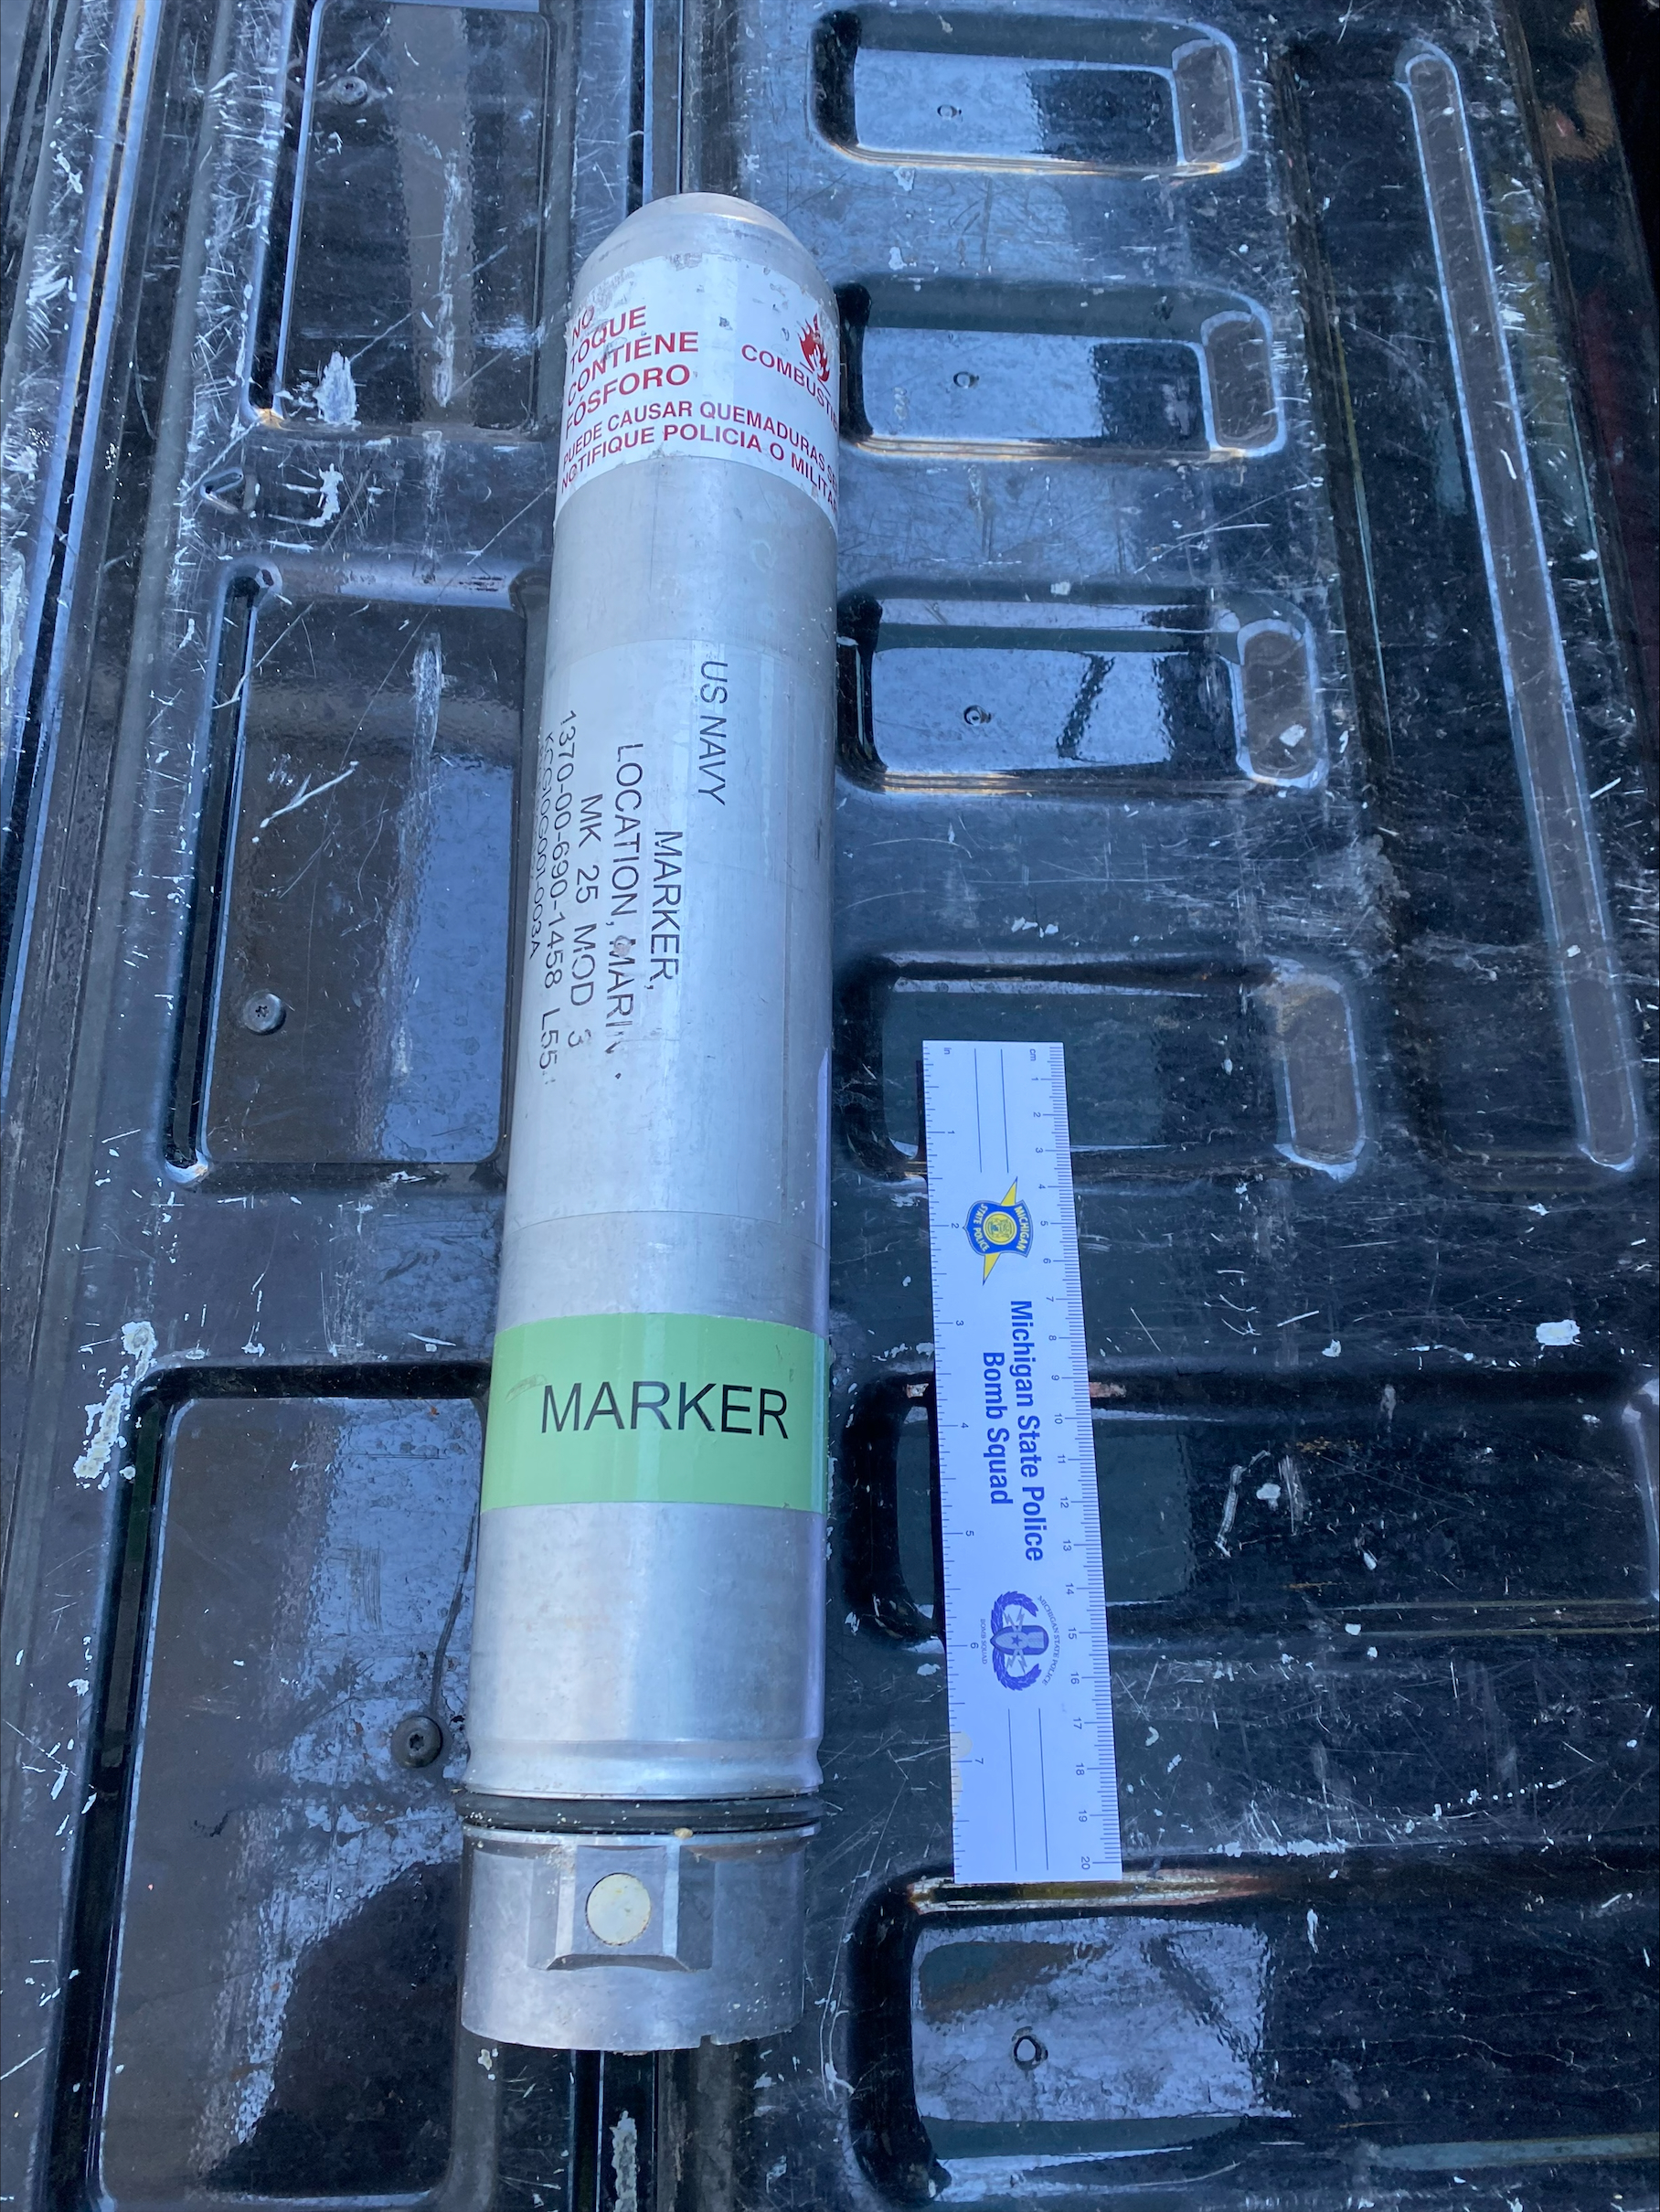 Coast Guard flare washes up on shore of East Bay, MSP Bomb Squad disposes